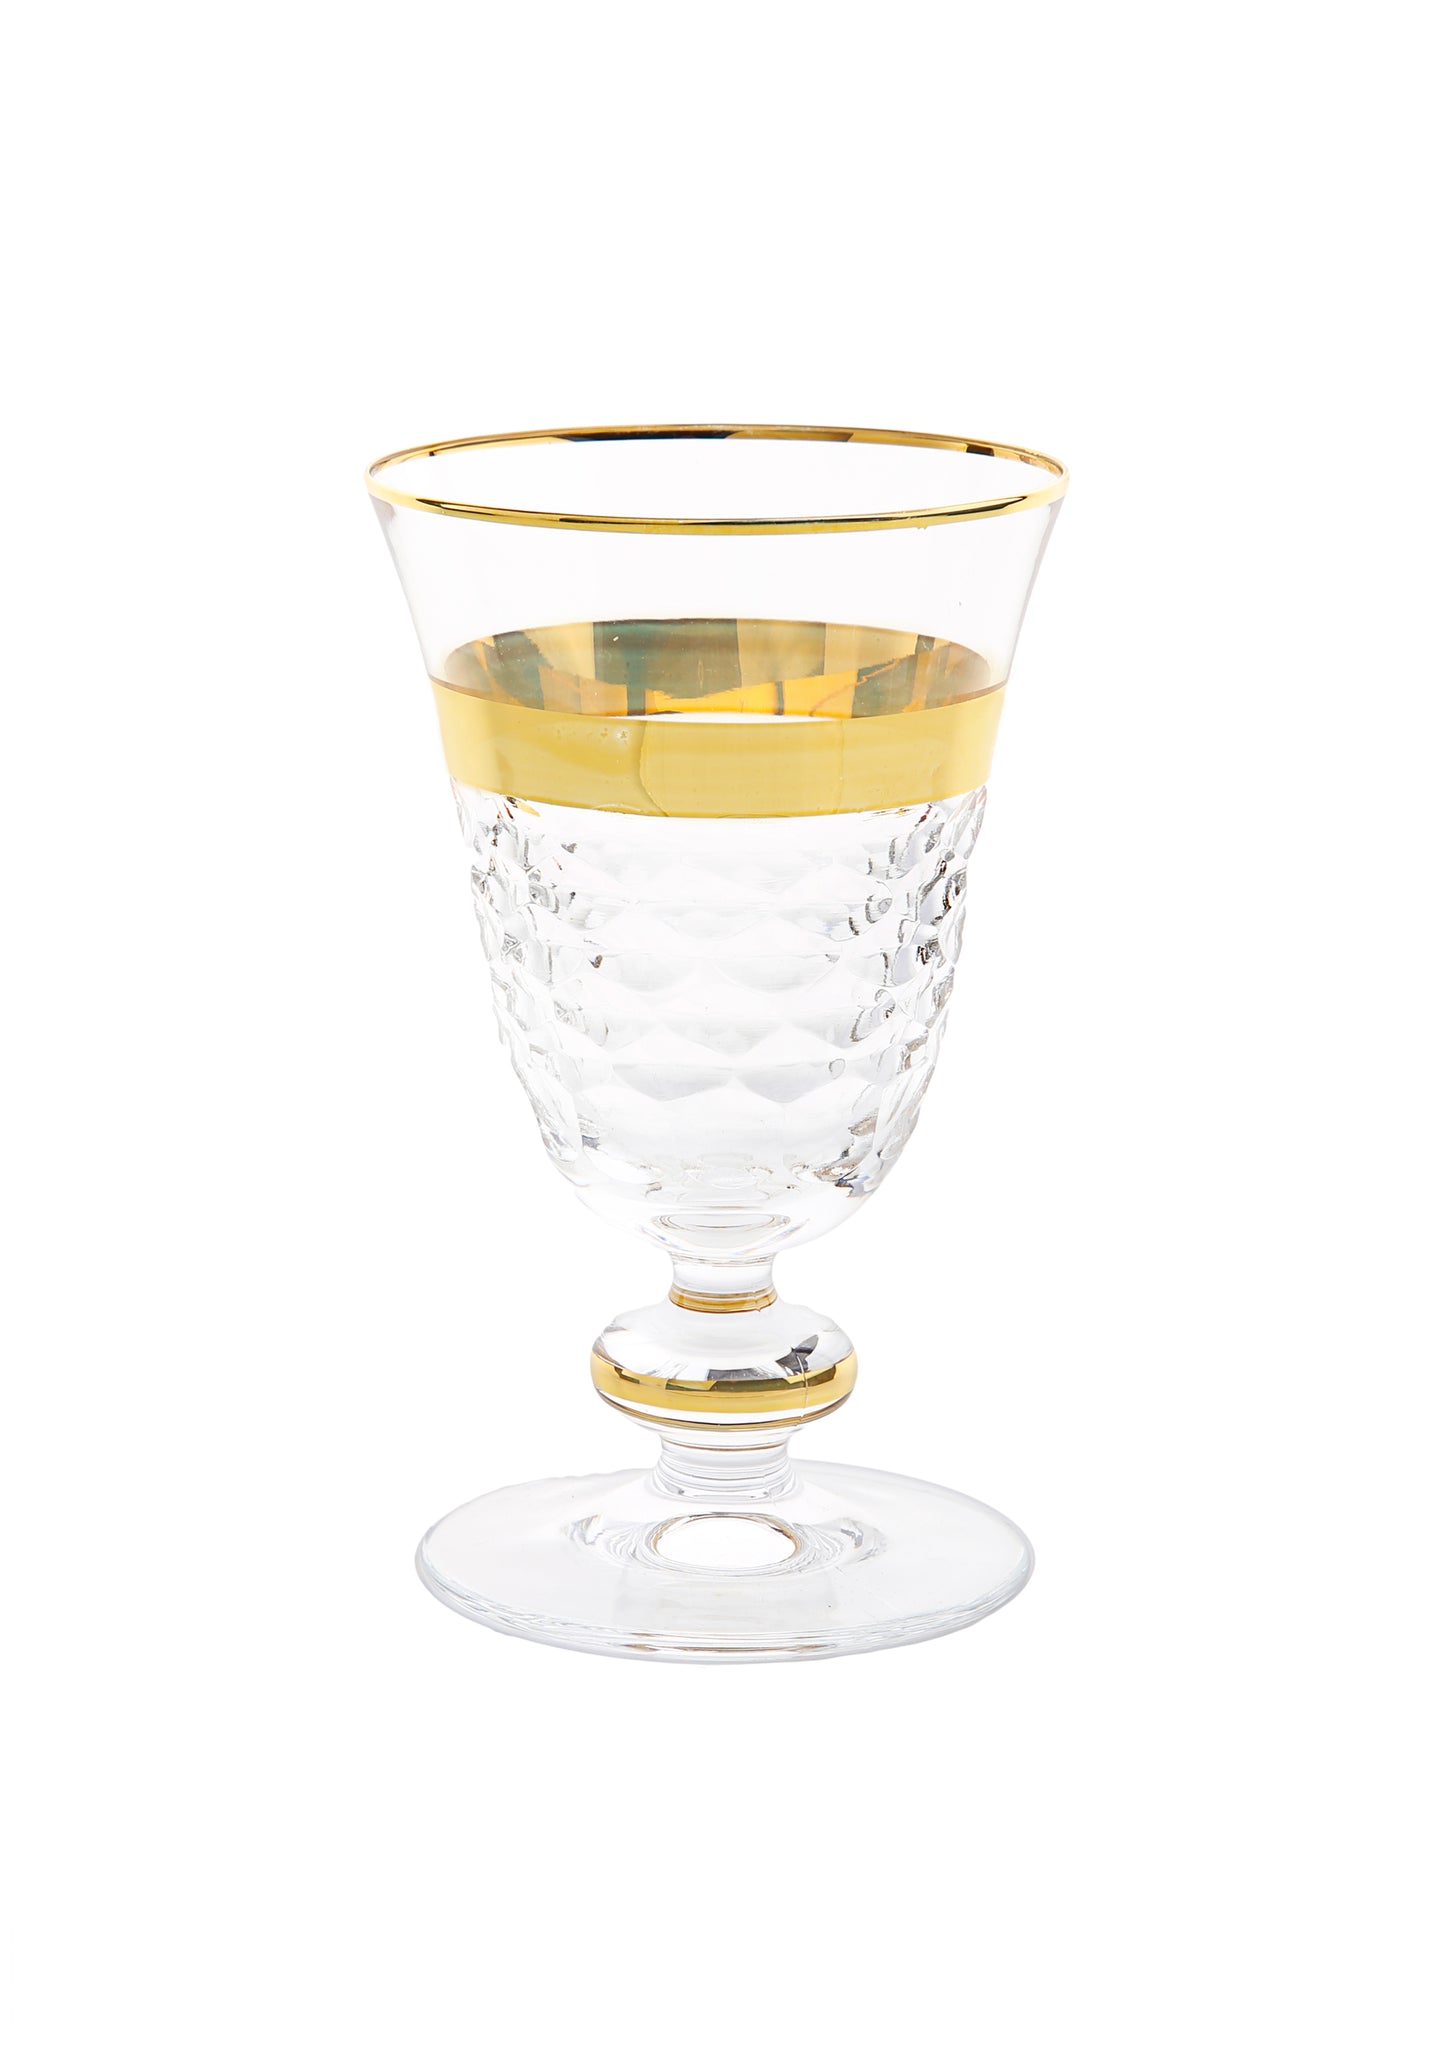 Set of 6 Short Stem Glasses with Gold and Crystal Detail